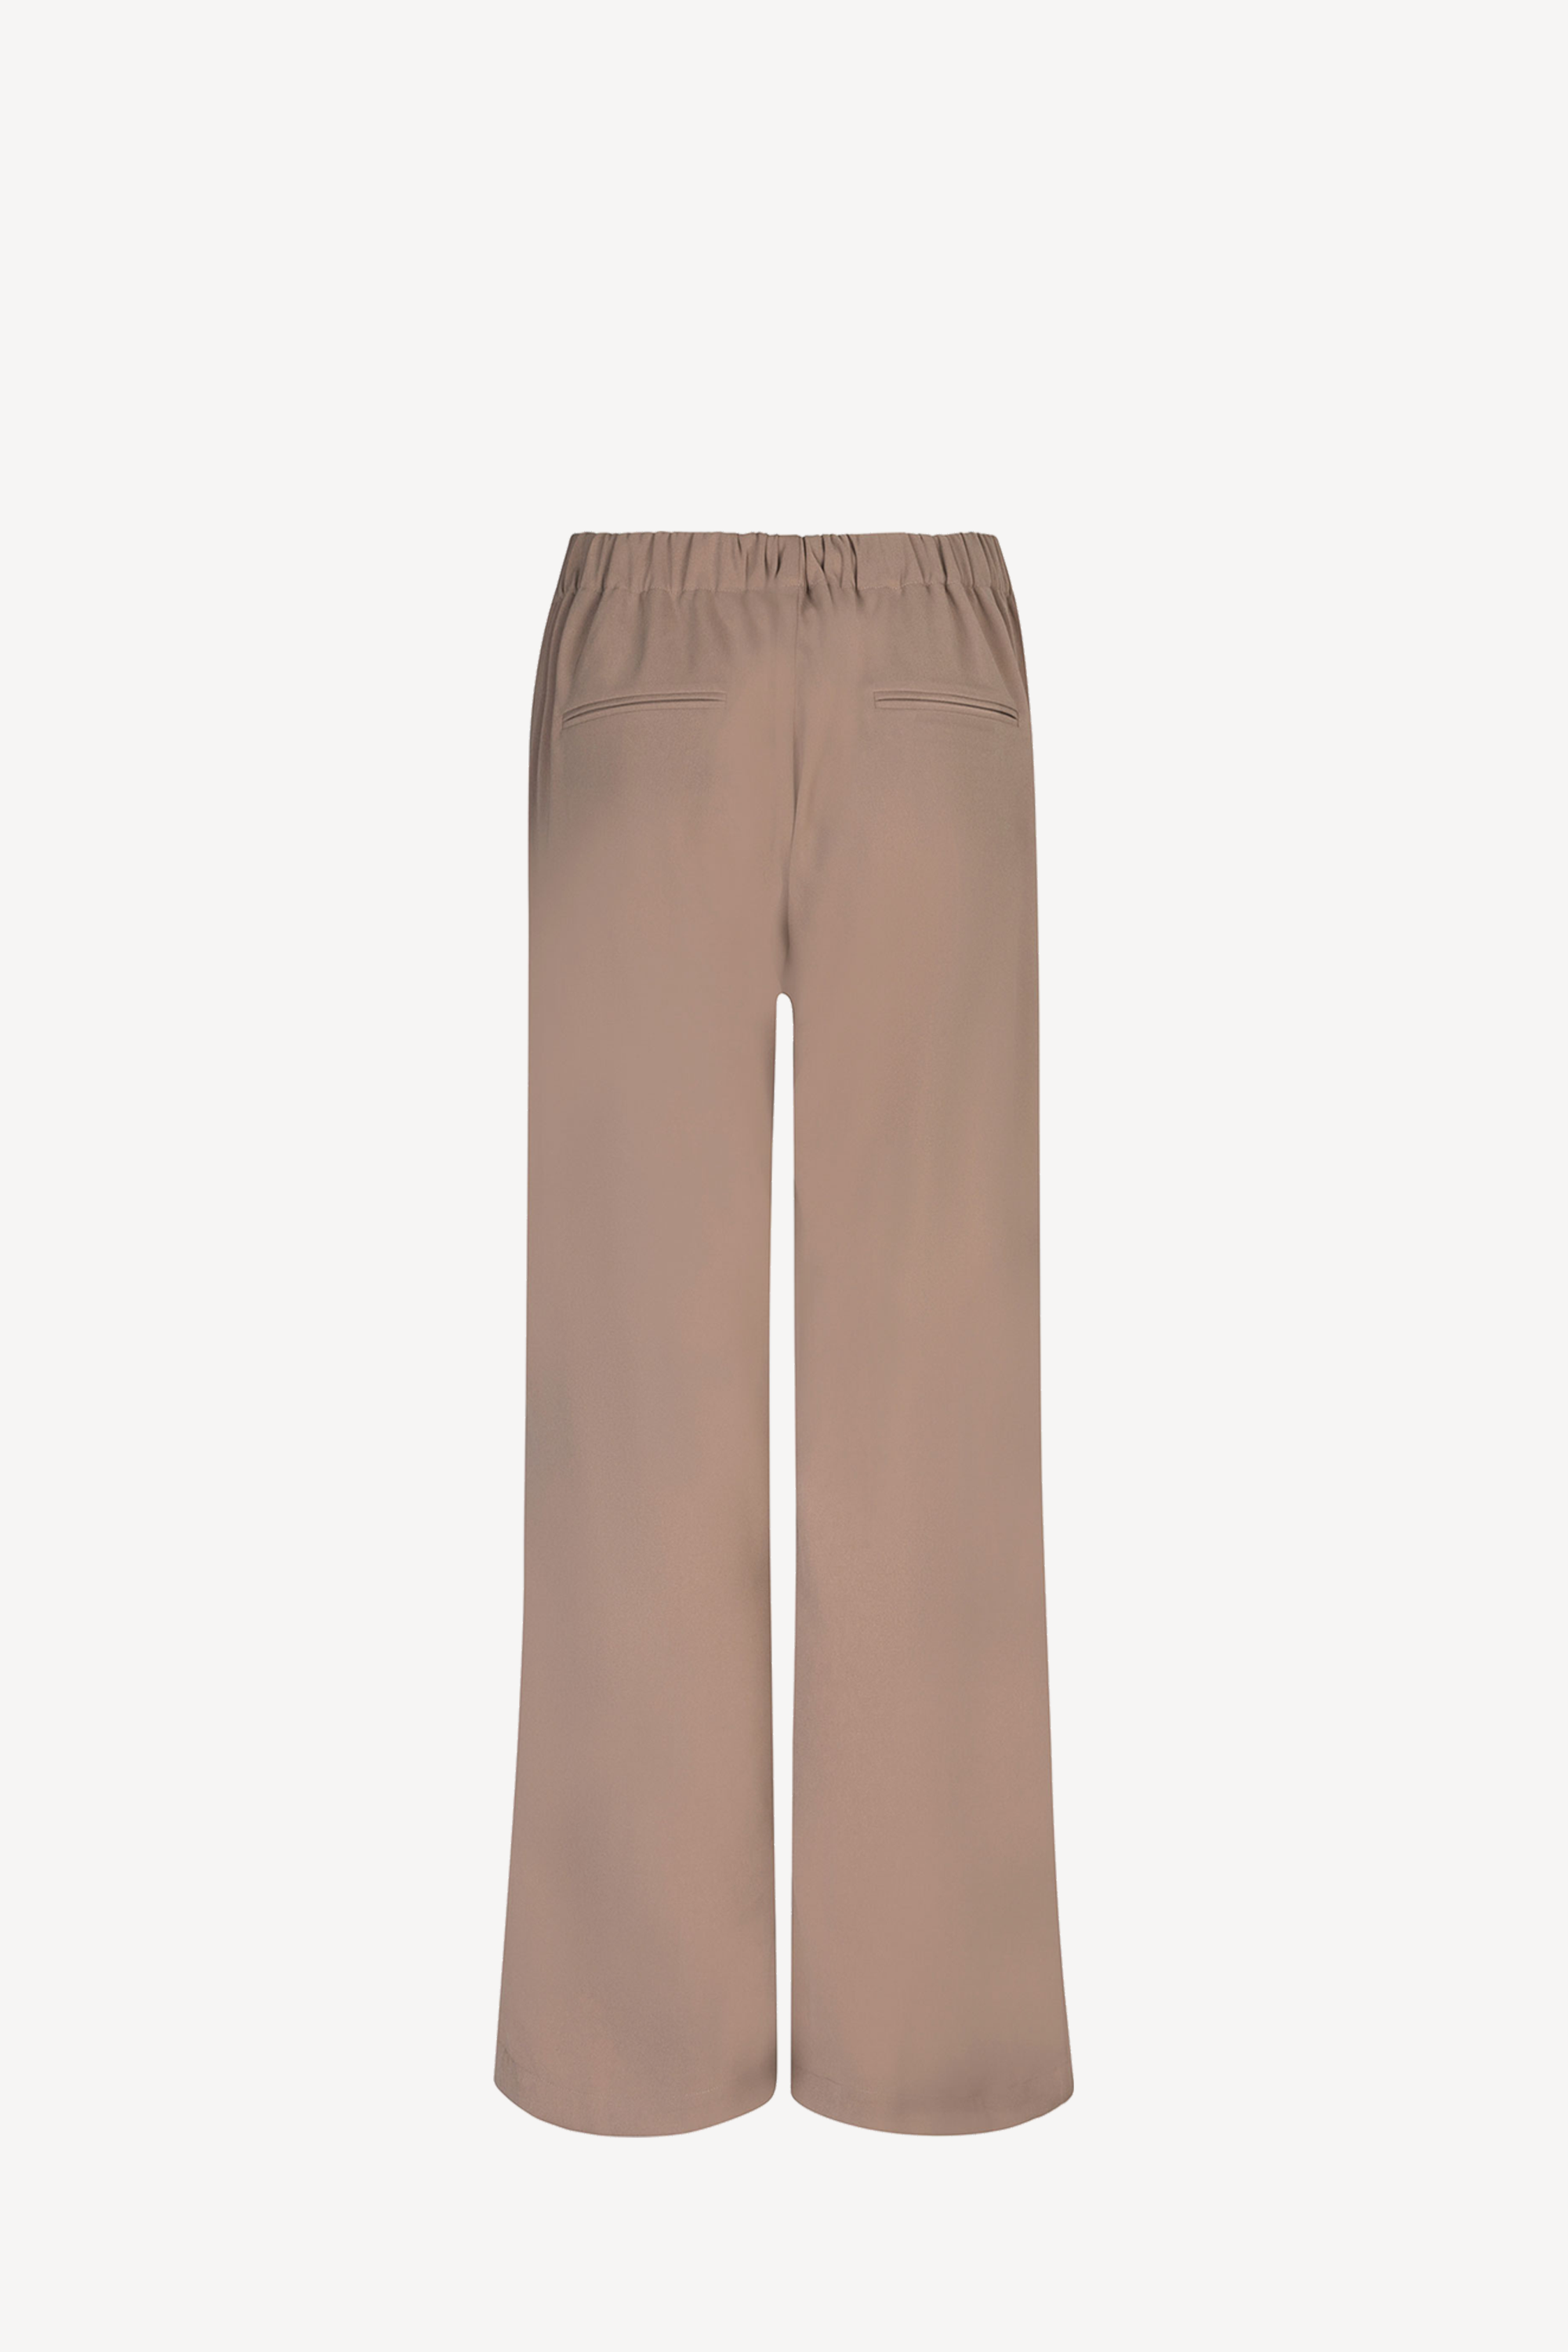 Pants Solange Taupe